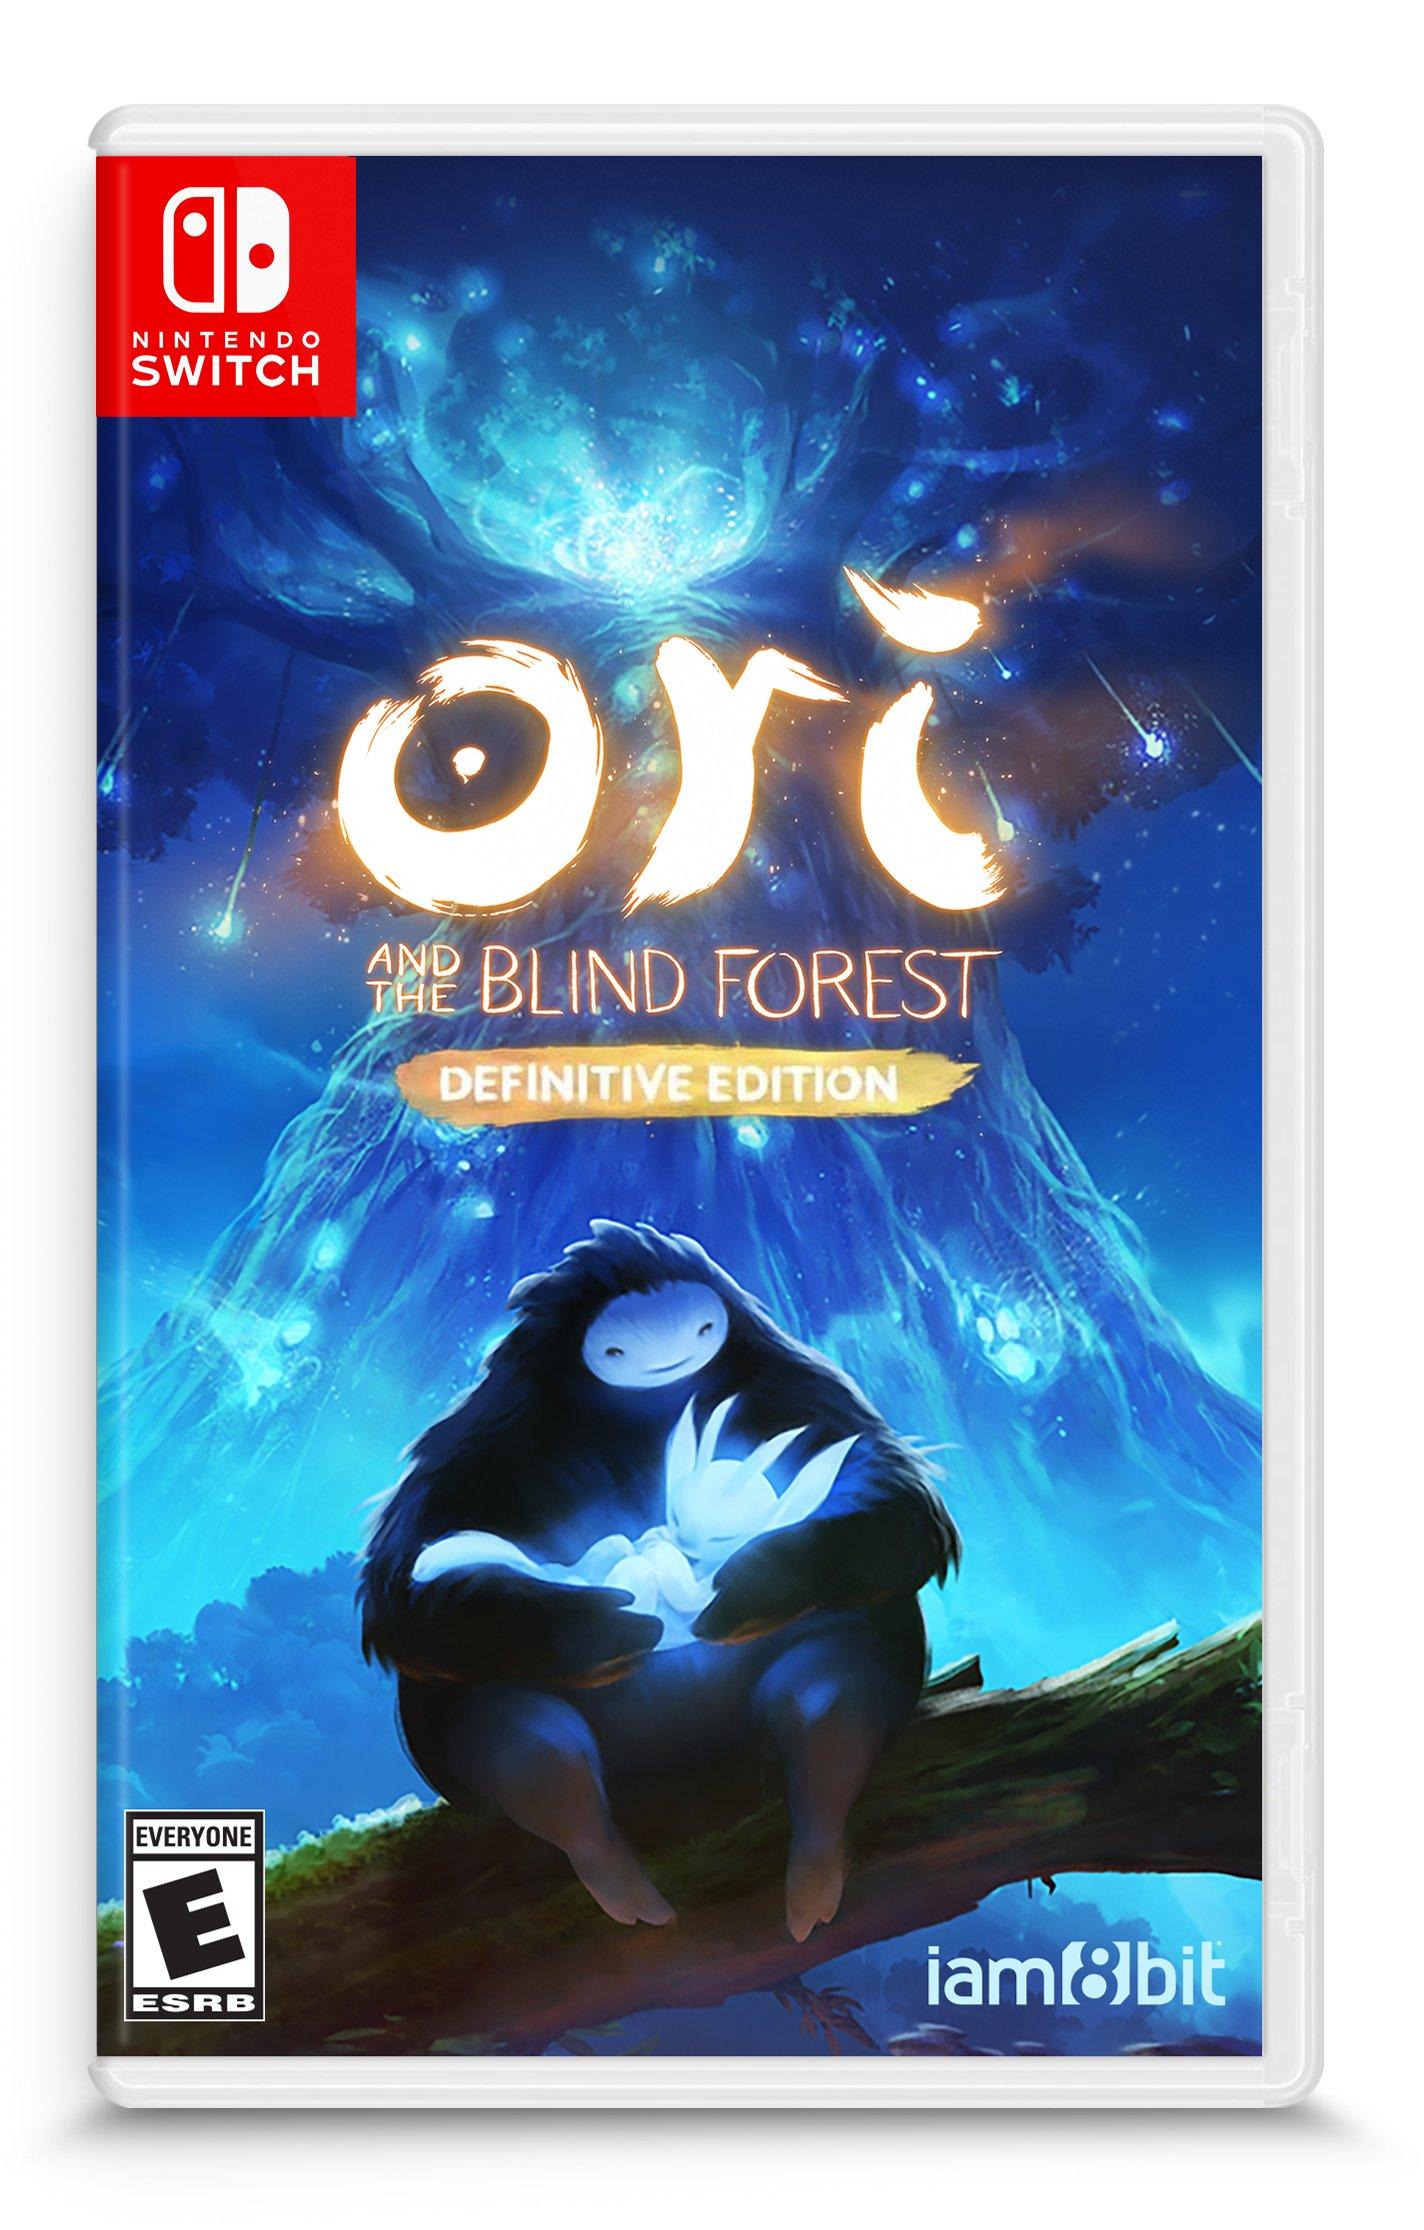 the forest xbox one gamestop